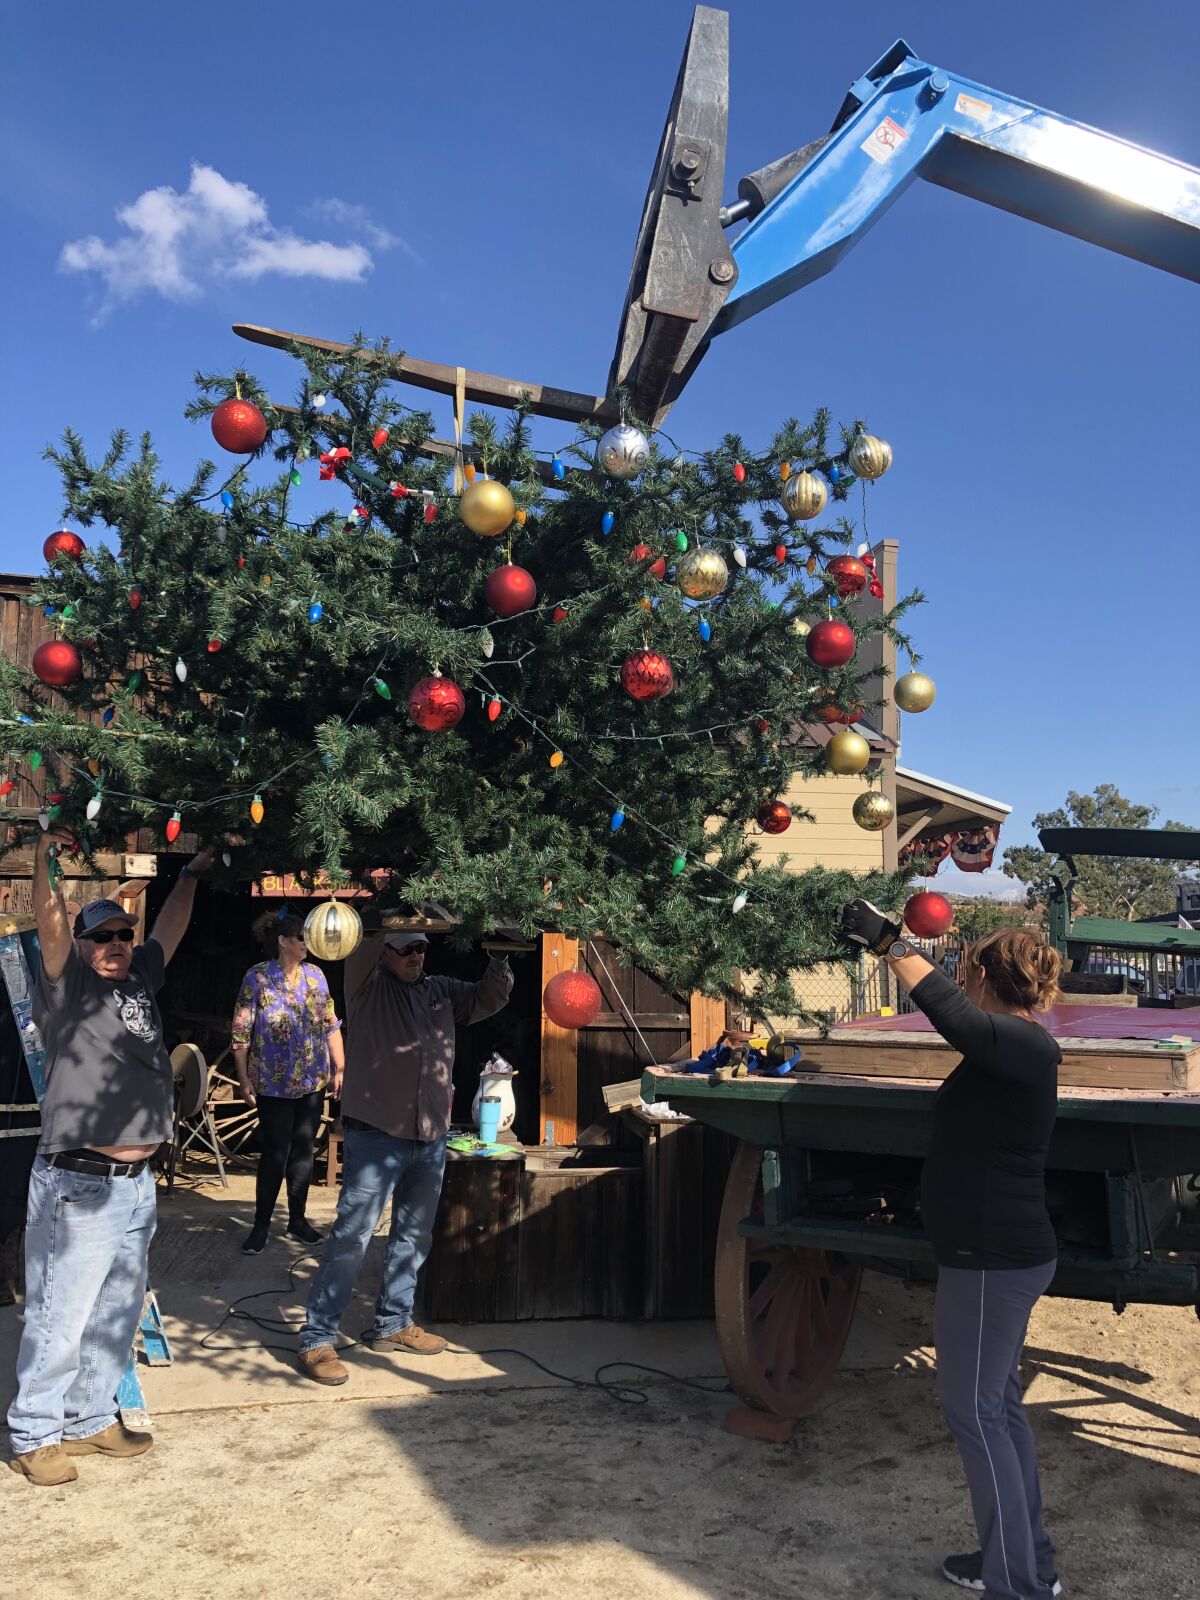 Ramona Chamber of Commerce members and volunteers erect the town Christmas Tree ready for the Lighting of the Tree ceremony on Dec. 7.